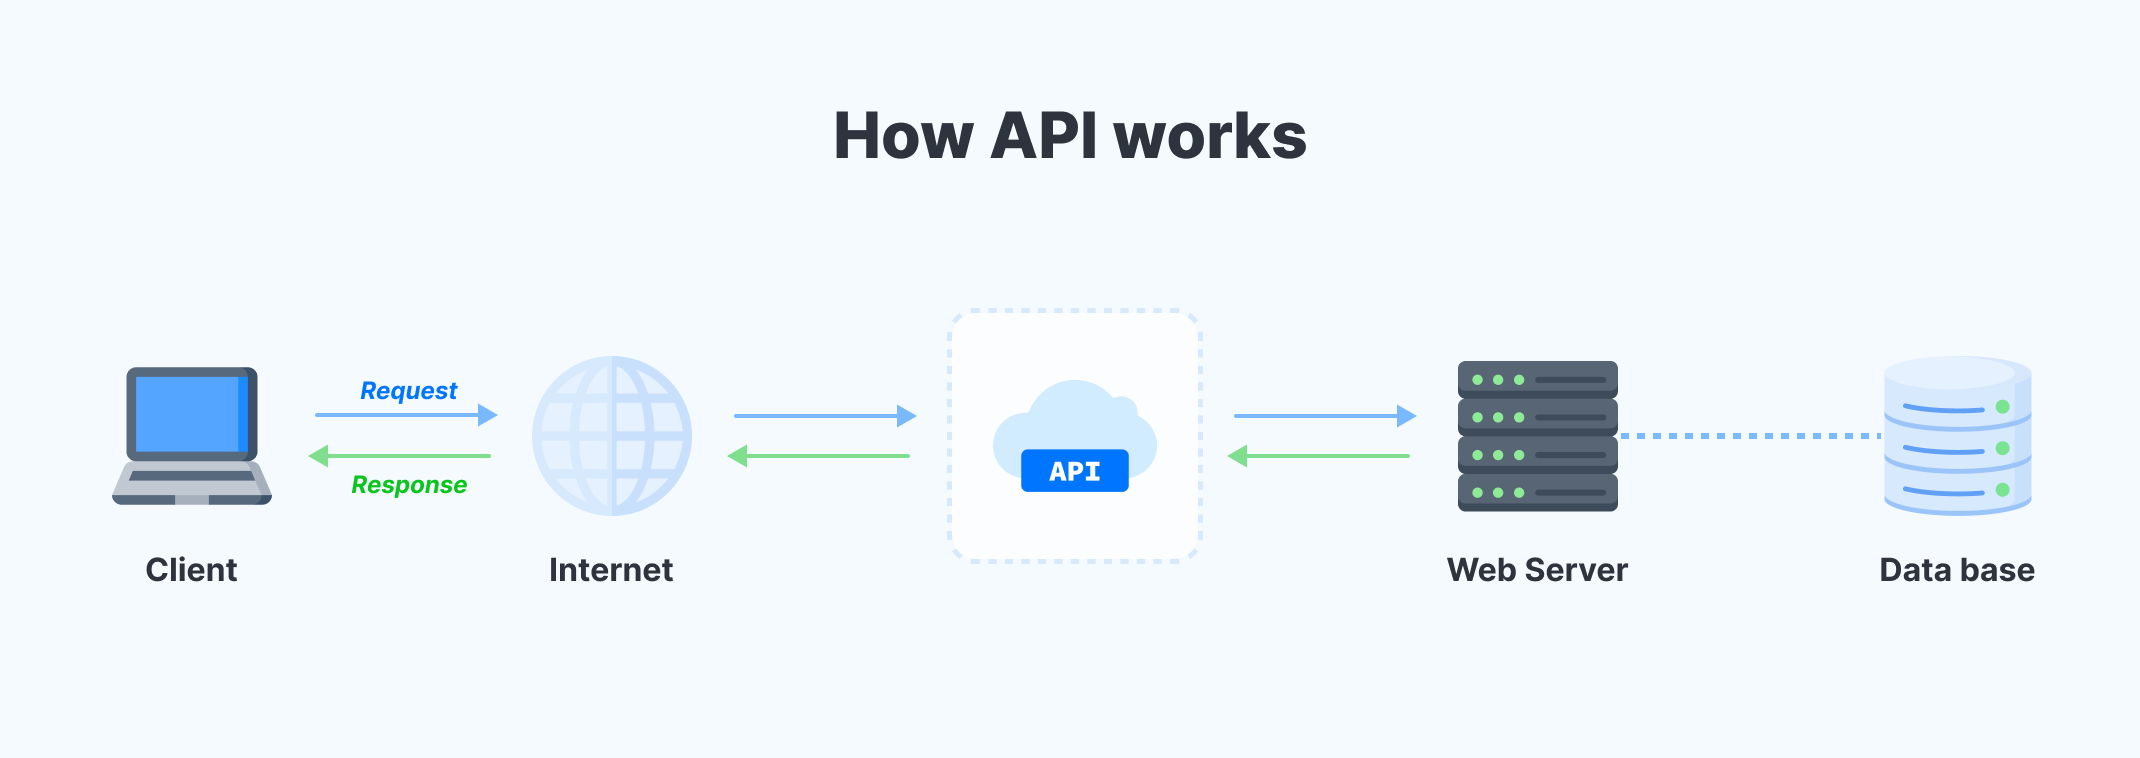 Endpoints in API : how it works